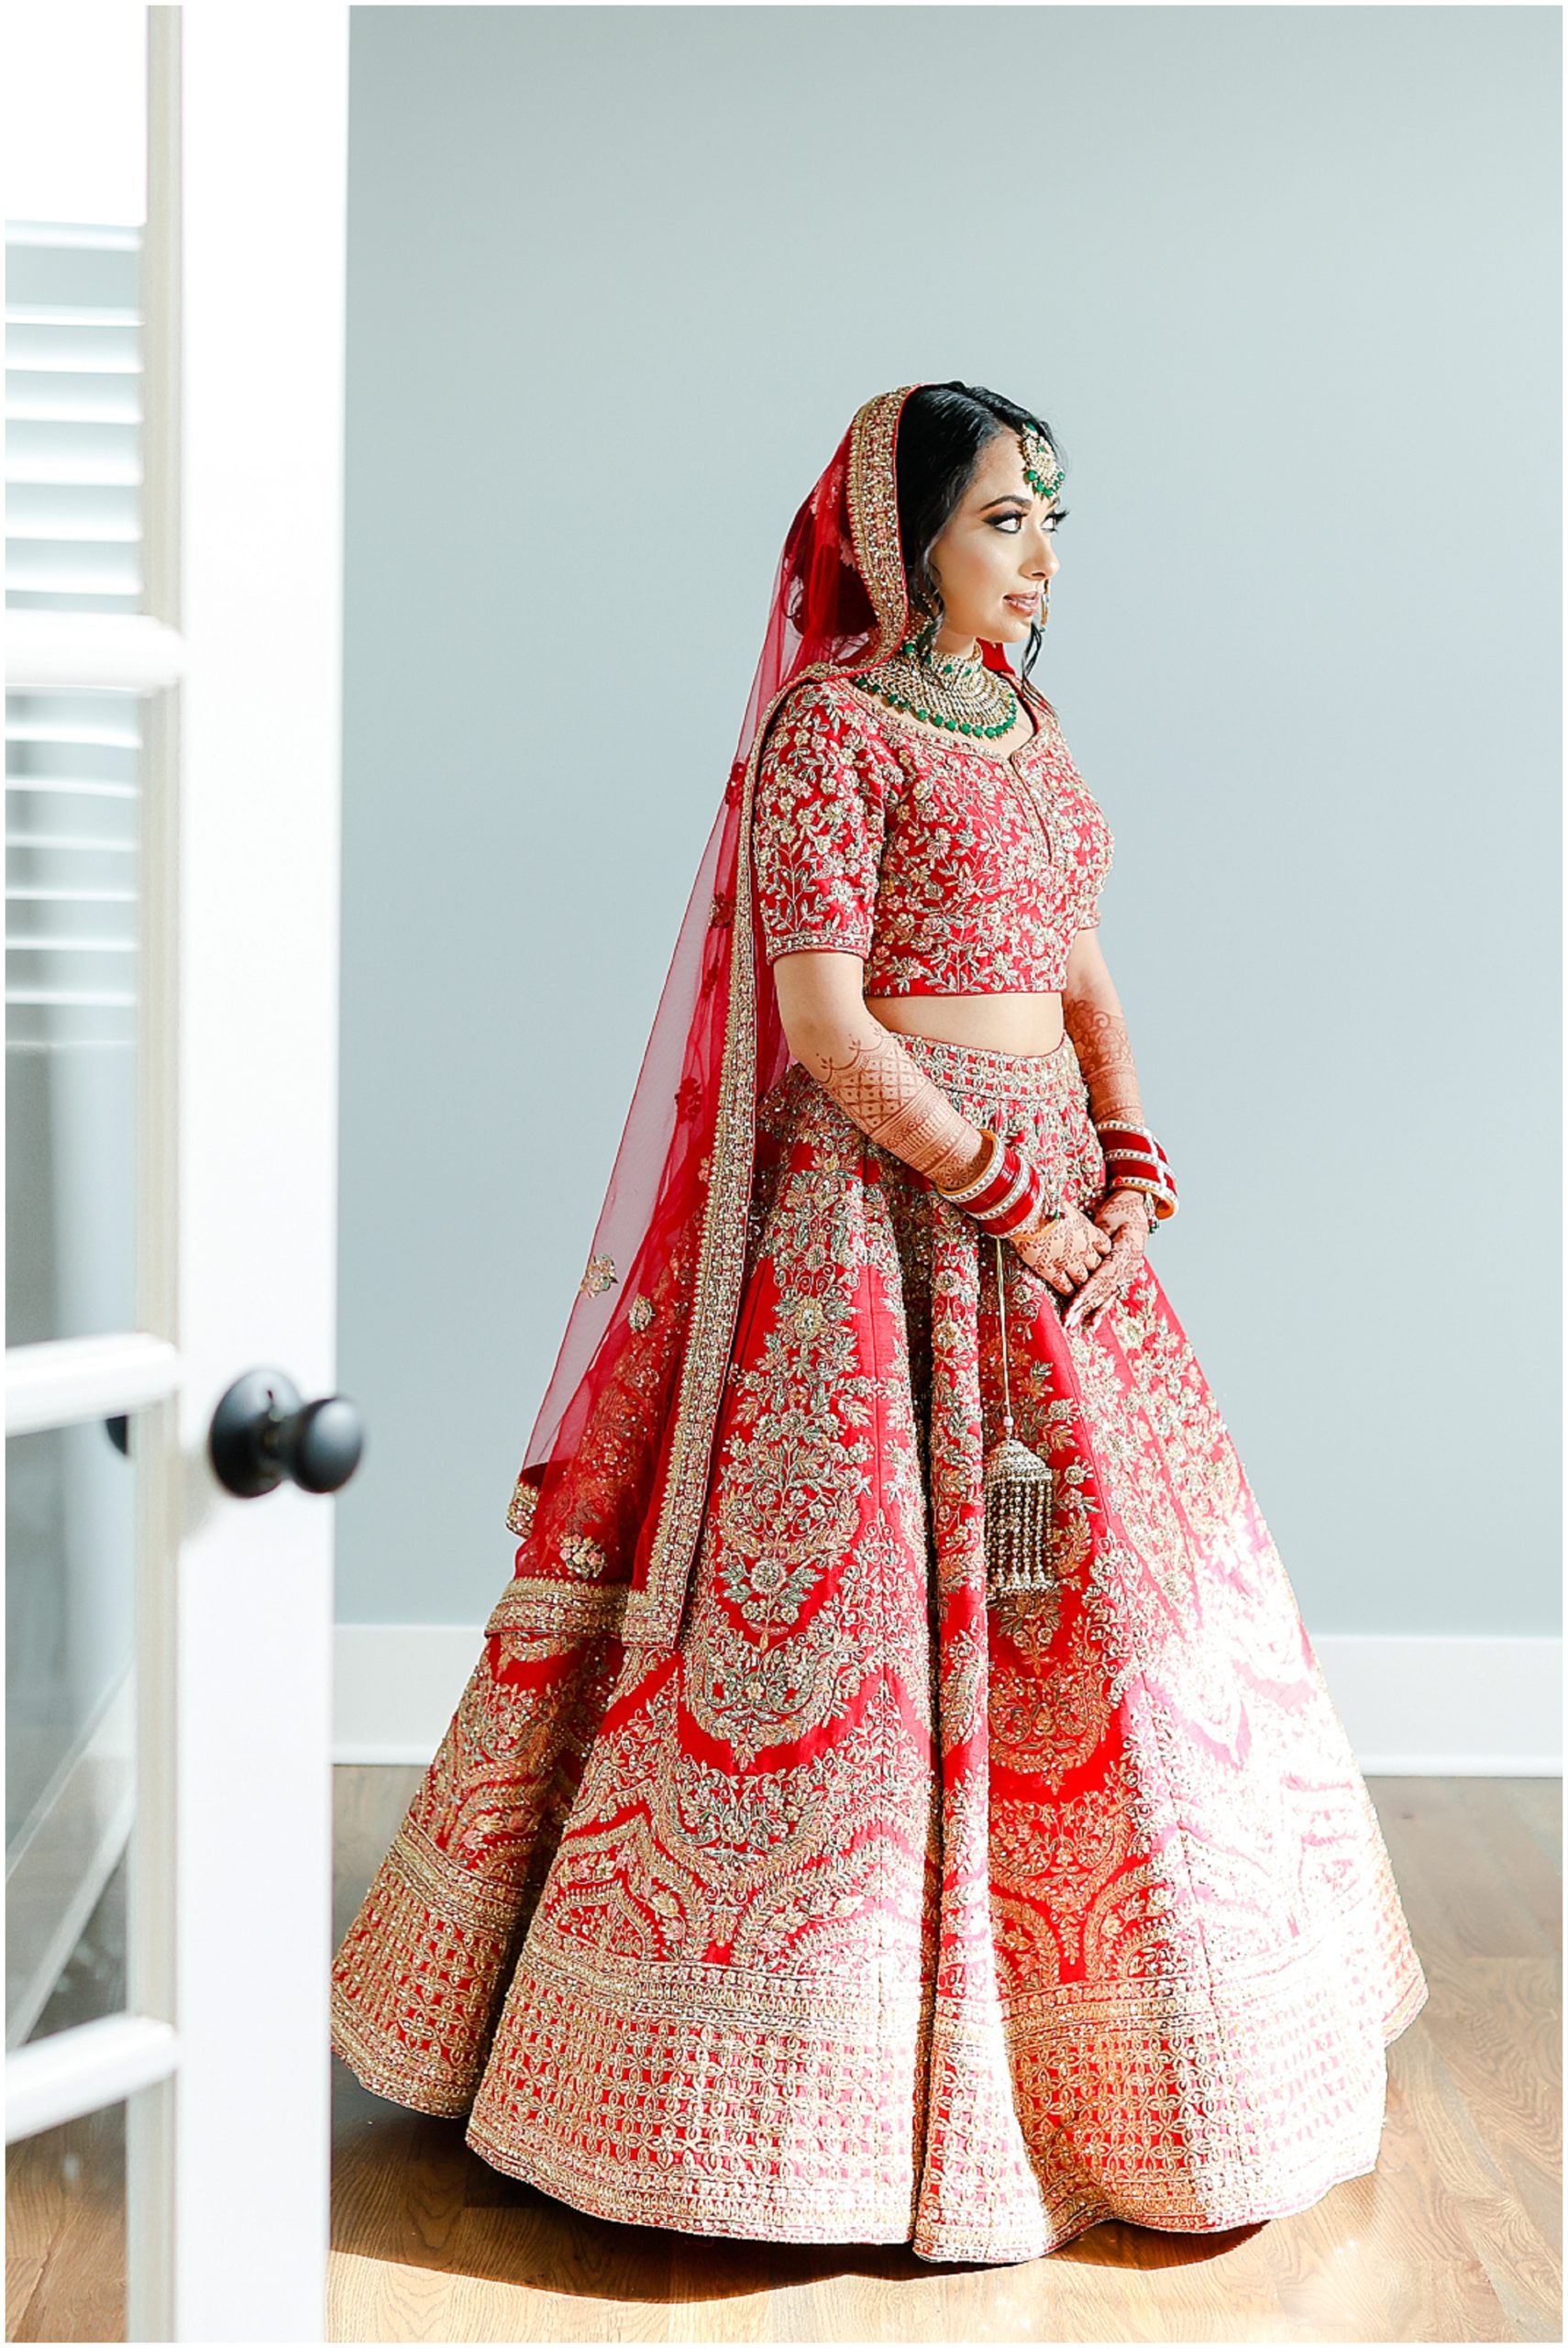 beautiful indian bride wedding photography looking out the window - Sikh Indian Wedding in Kansas City - Wedding Photographer in Kansas Overland Park - Indian Fusion Wedding Photography